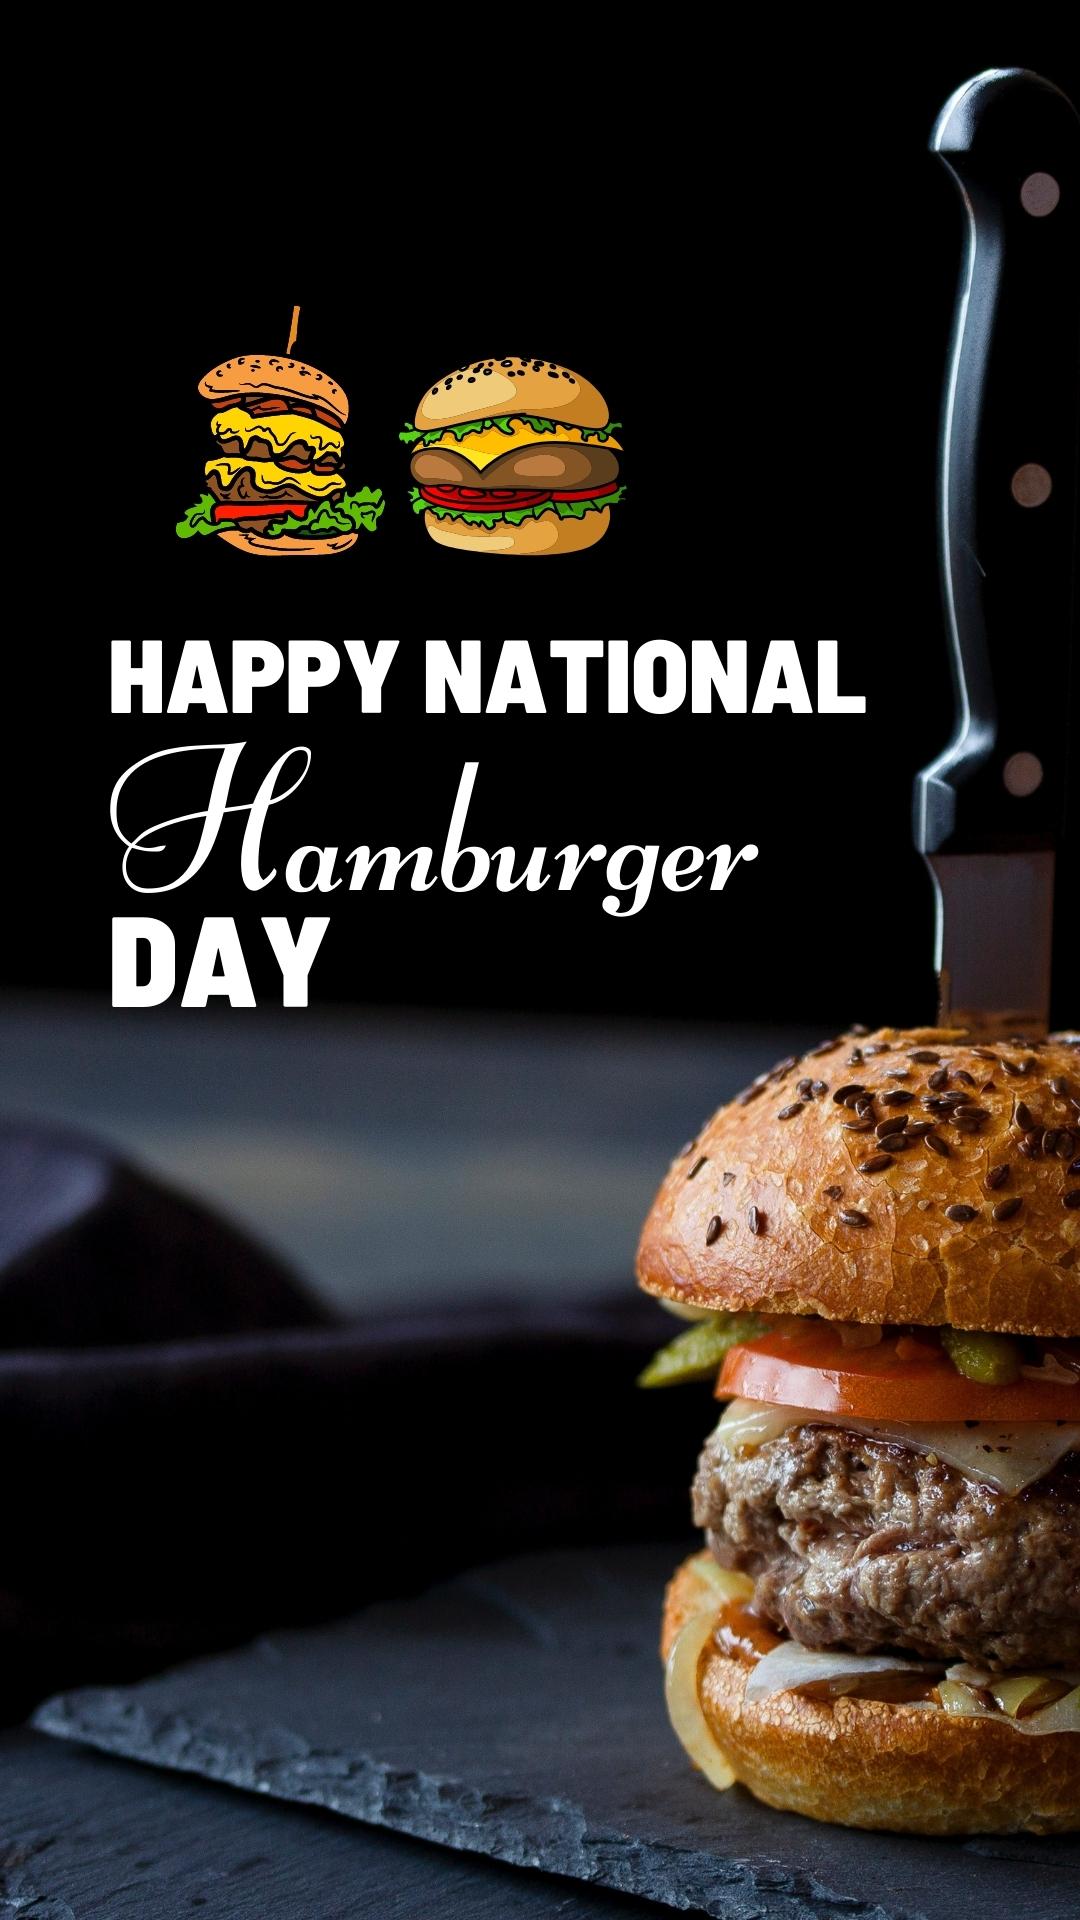 best national hamburger day wishes images for instagram post (36)